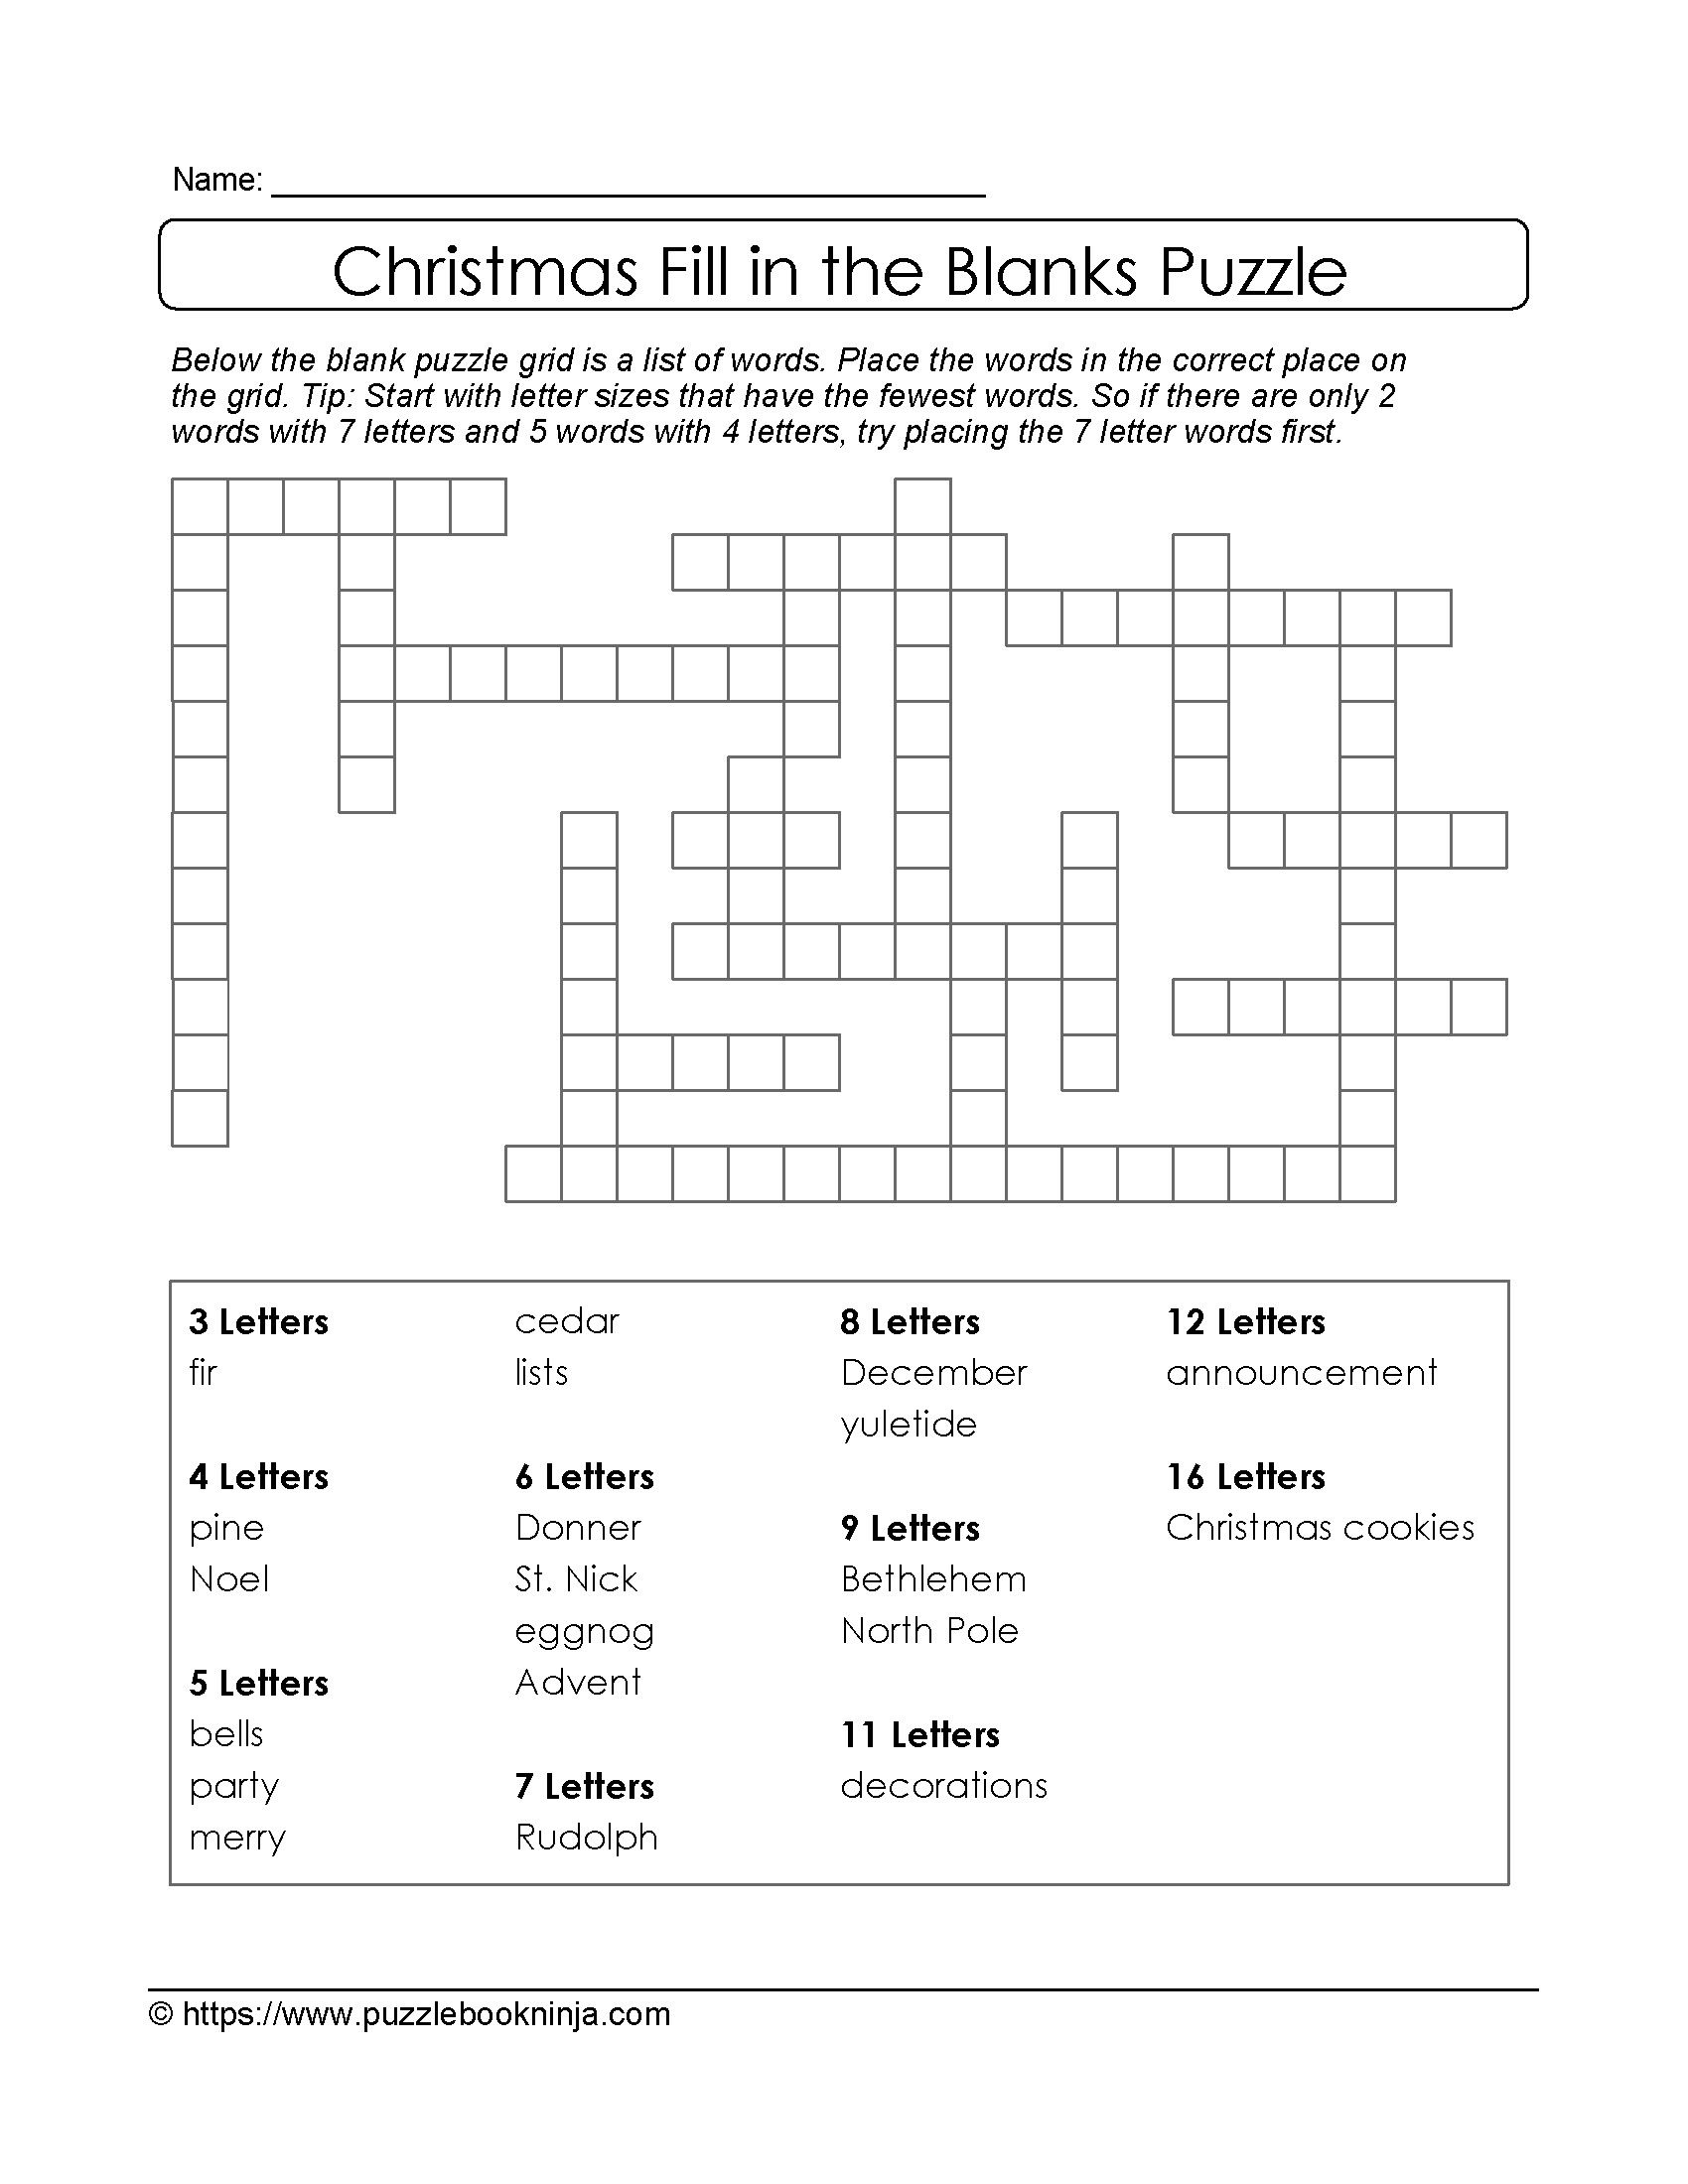 Christmas Printable Puzzle. Free Fill In The Blanks. | Christmas - 9 Letter Word Puzzle Printable